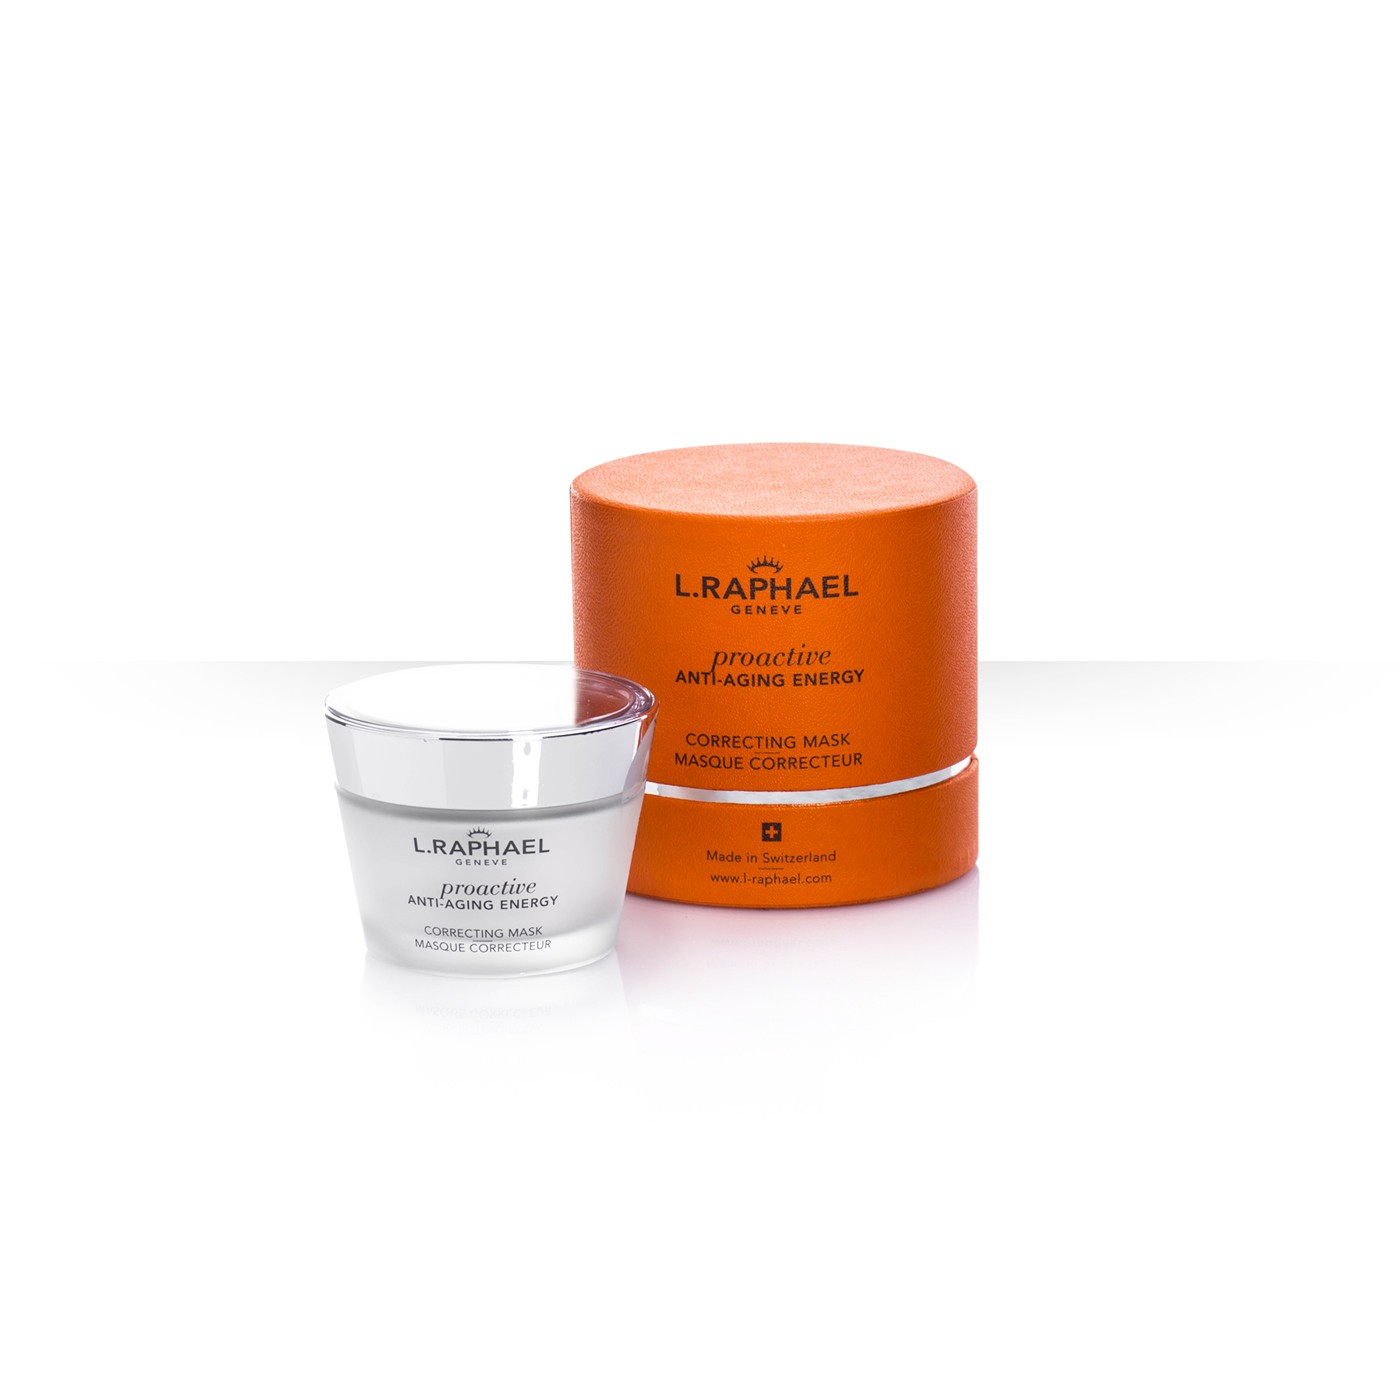 dermatologist recommended skin care products for aging skin 2020 lézeres szemműtét cylinder